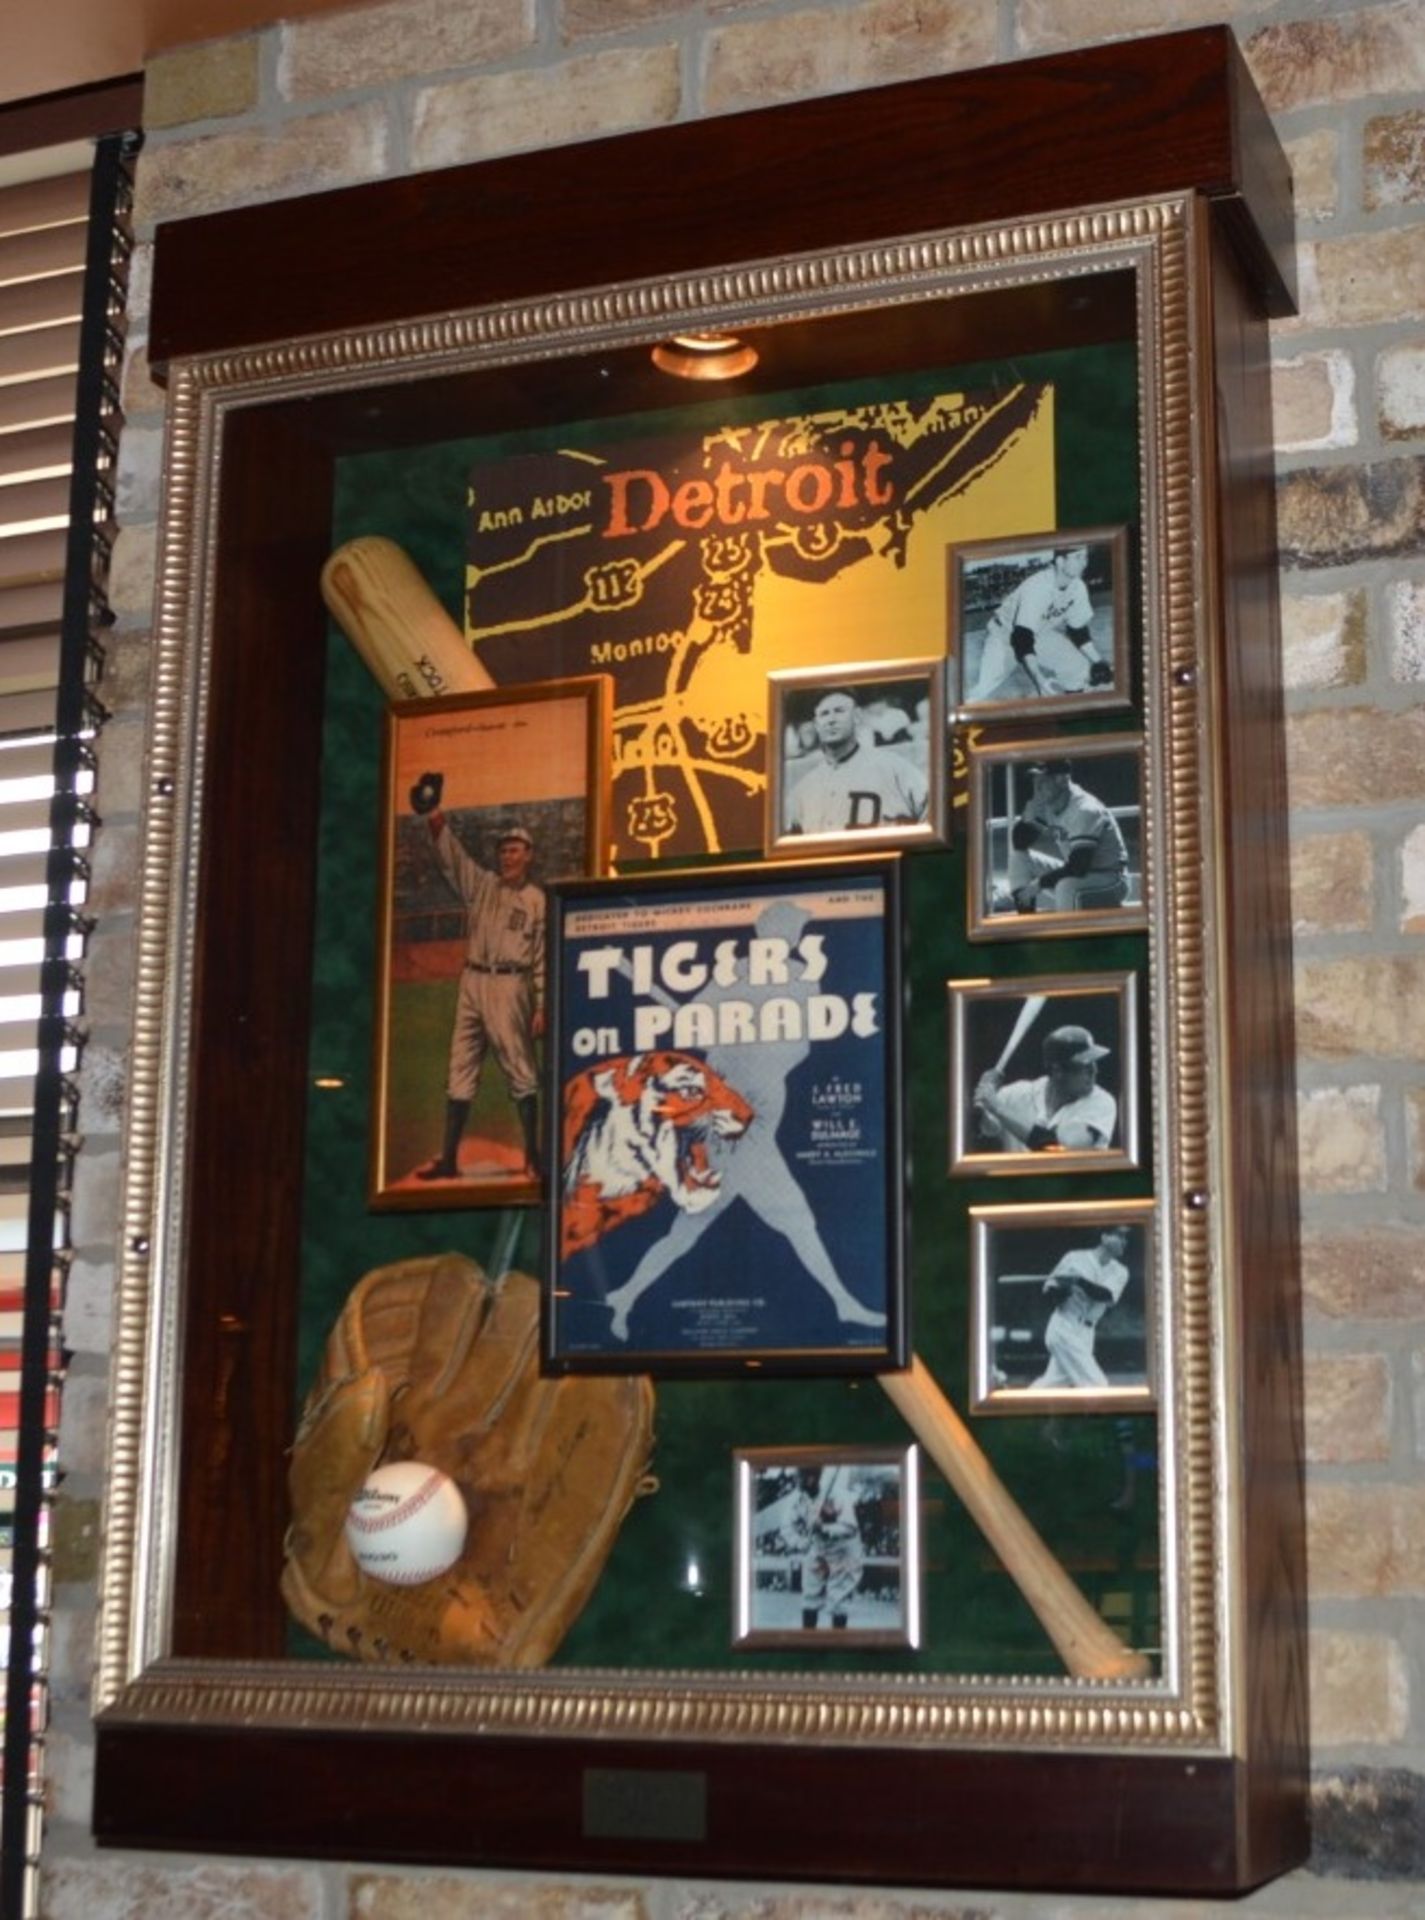 1 x Americana Wall Mounted Illuminated Display Case - DETROIT TIGERS BASEBALL - Includes Various - Image 2 of 5